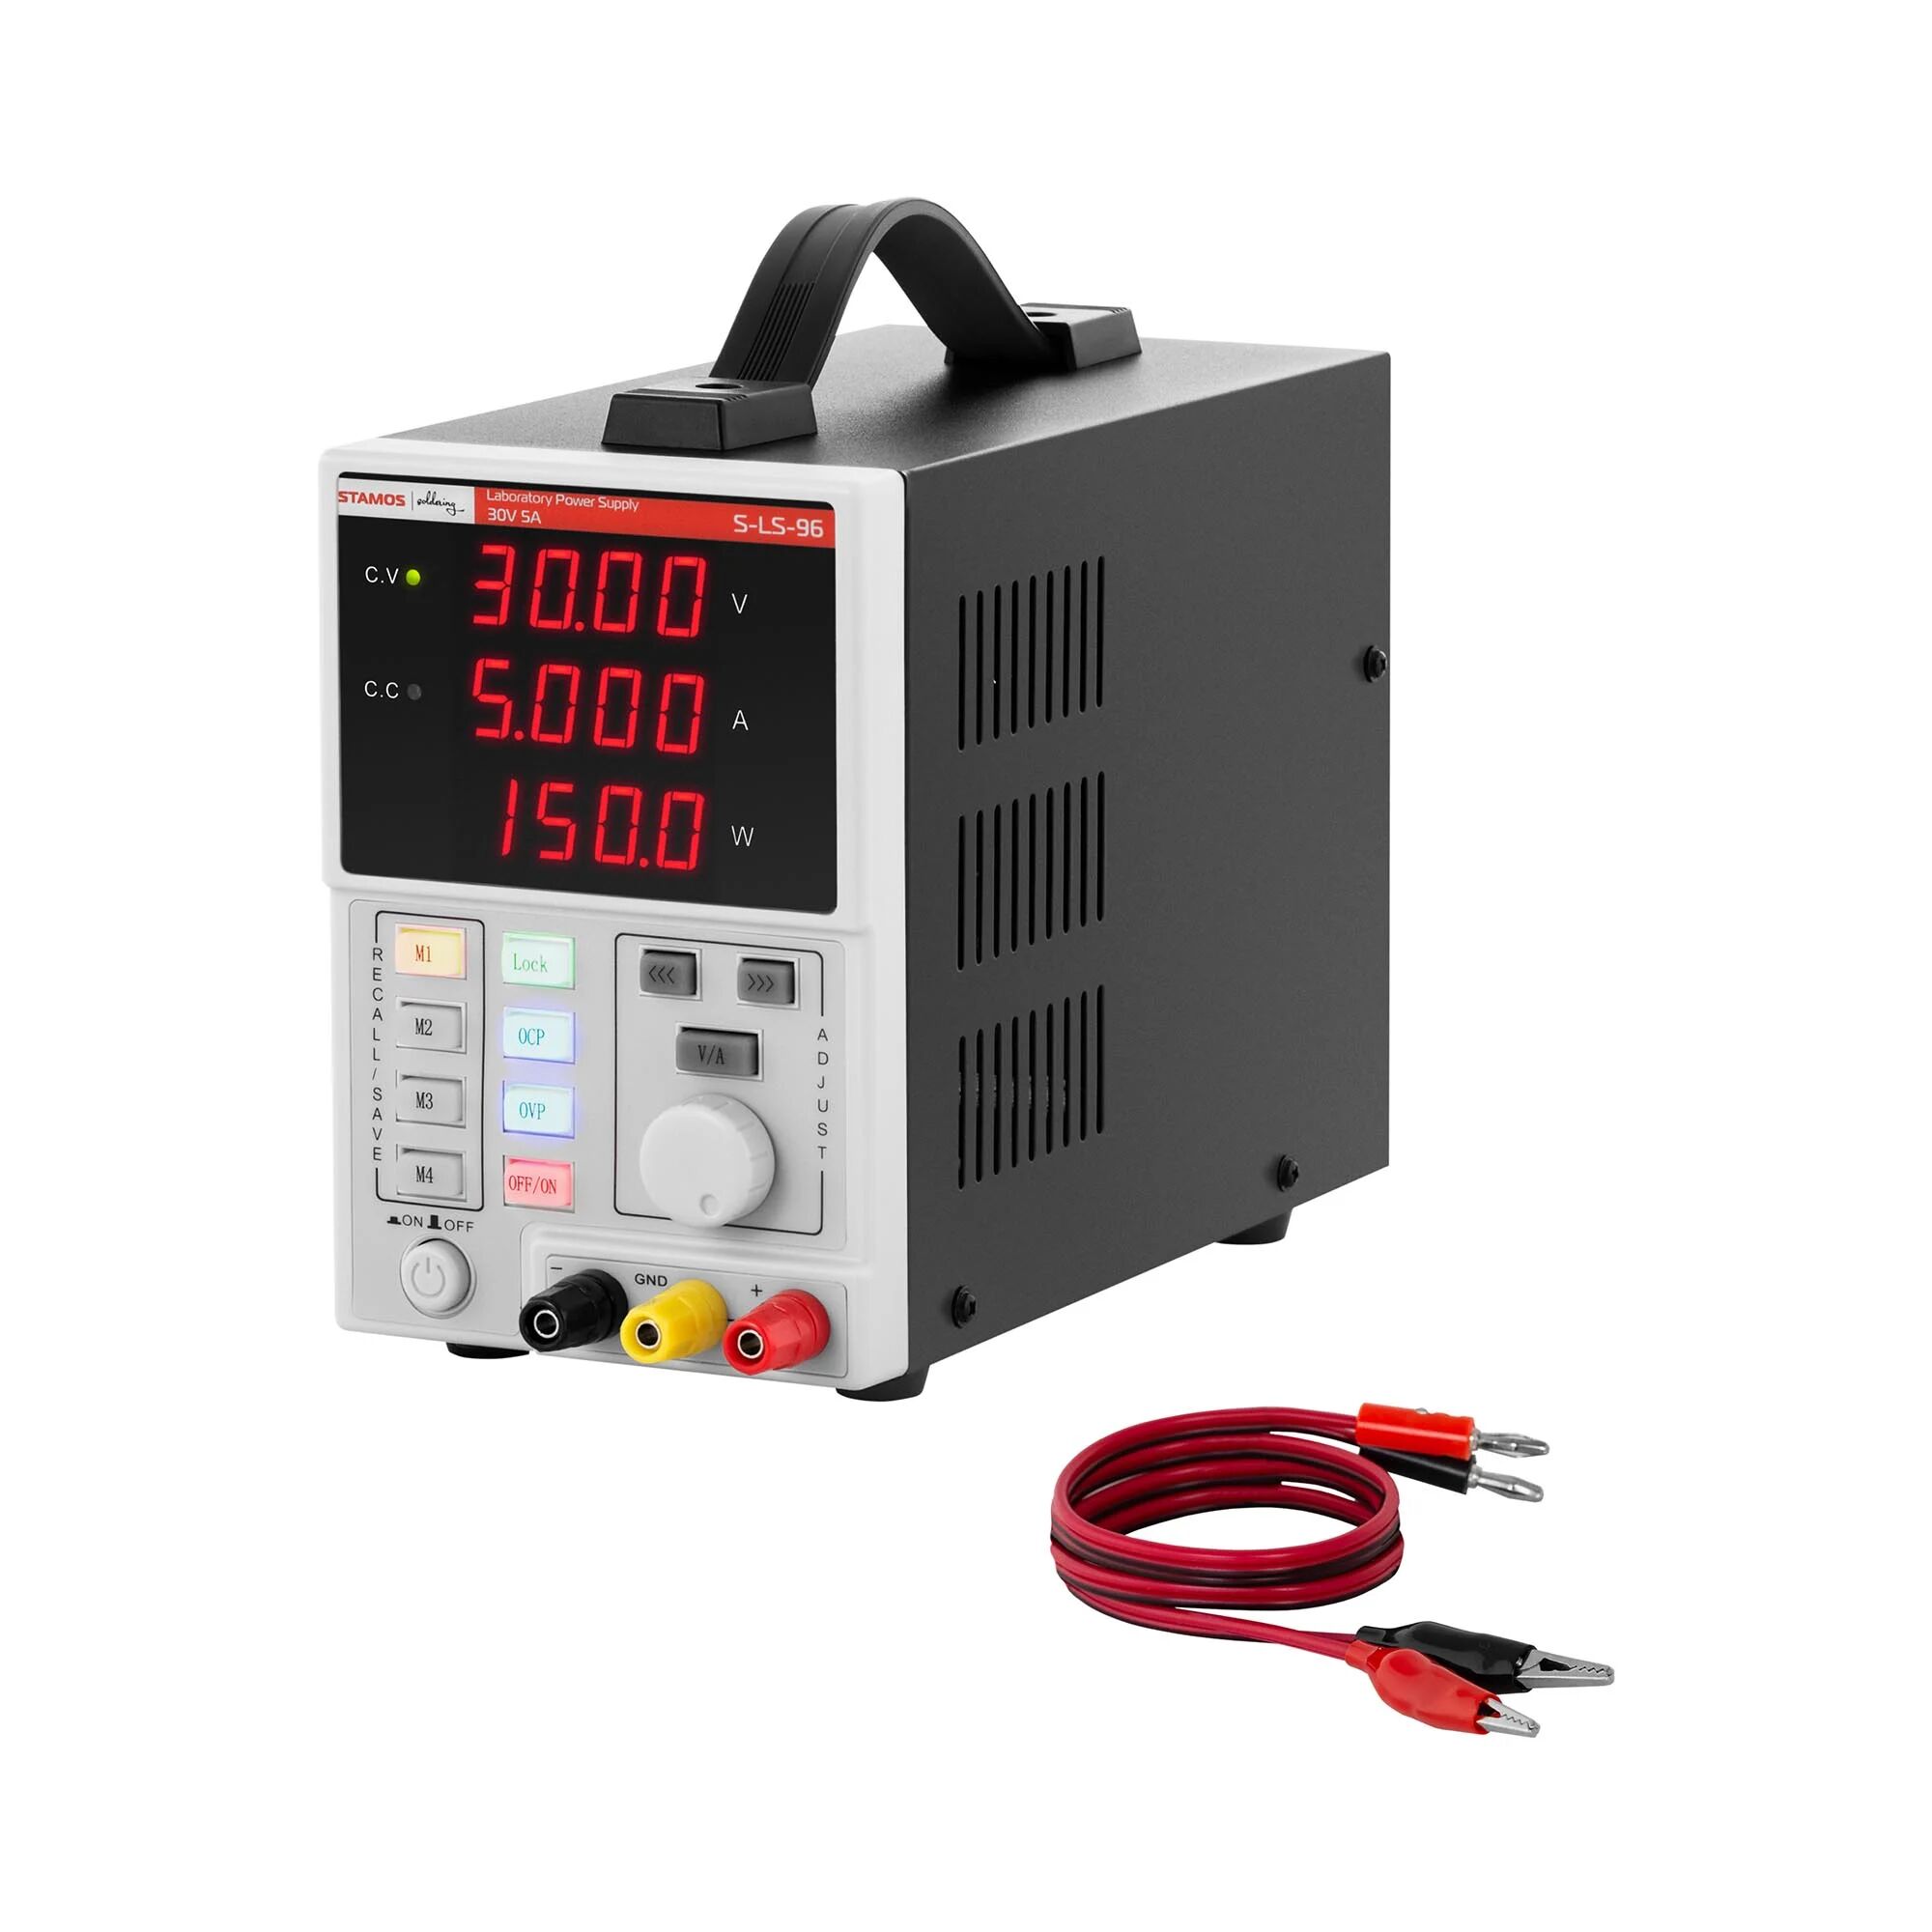 Stamos Soldering Bench Power Supply - 0 - 30 V - 0 - 5 A DC - 150 W - 4-digit LED display